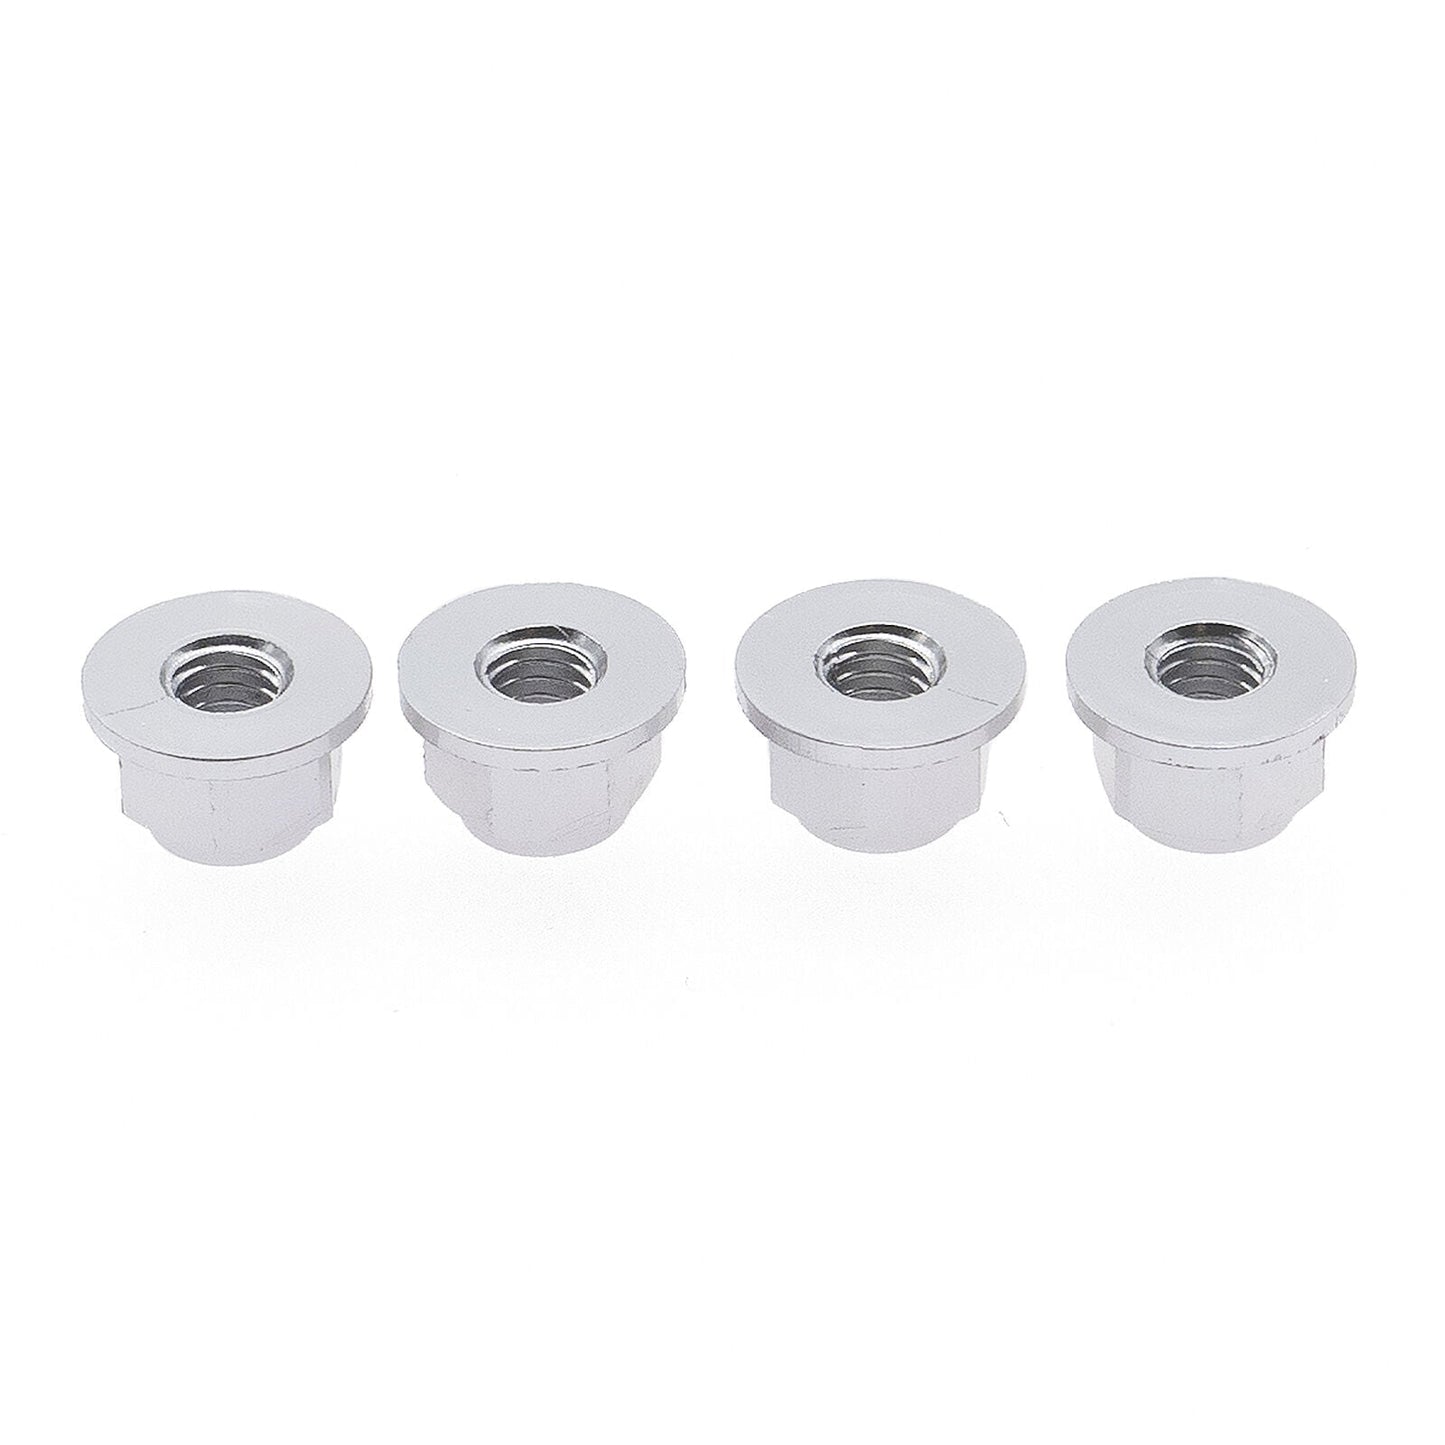 RCAWD ECX UPGRADE PARTS RCAWD Alloy M4 4mm tire wheel hex lock nut for rc hobby model car 1/10 ECX 2WD series